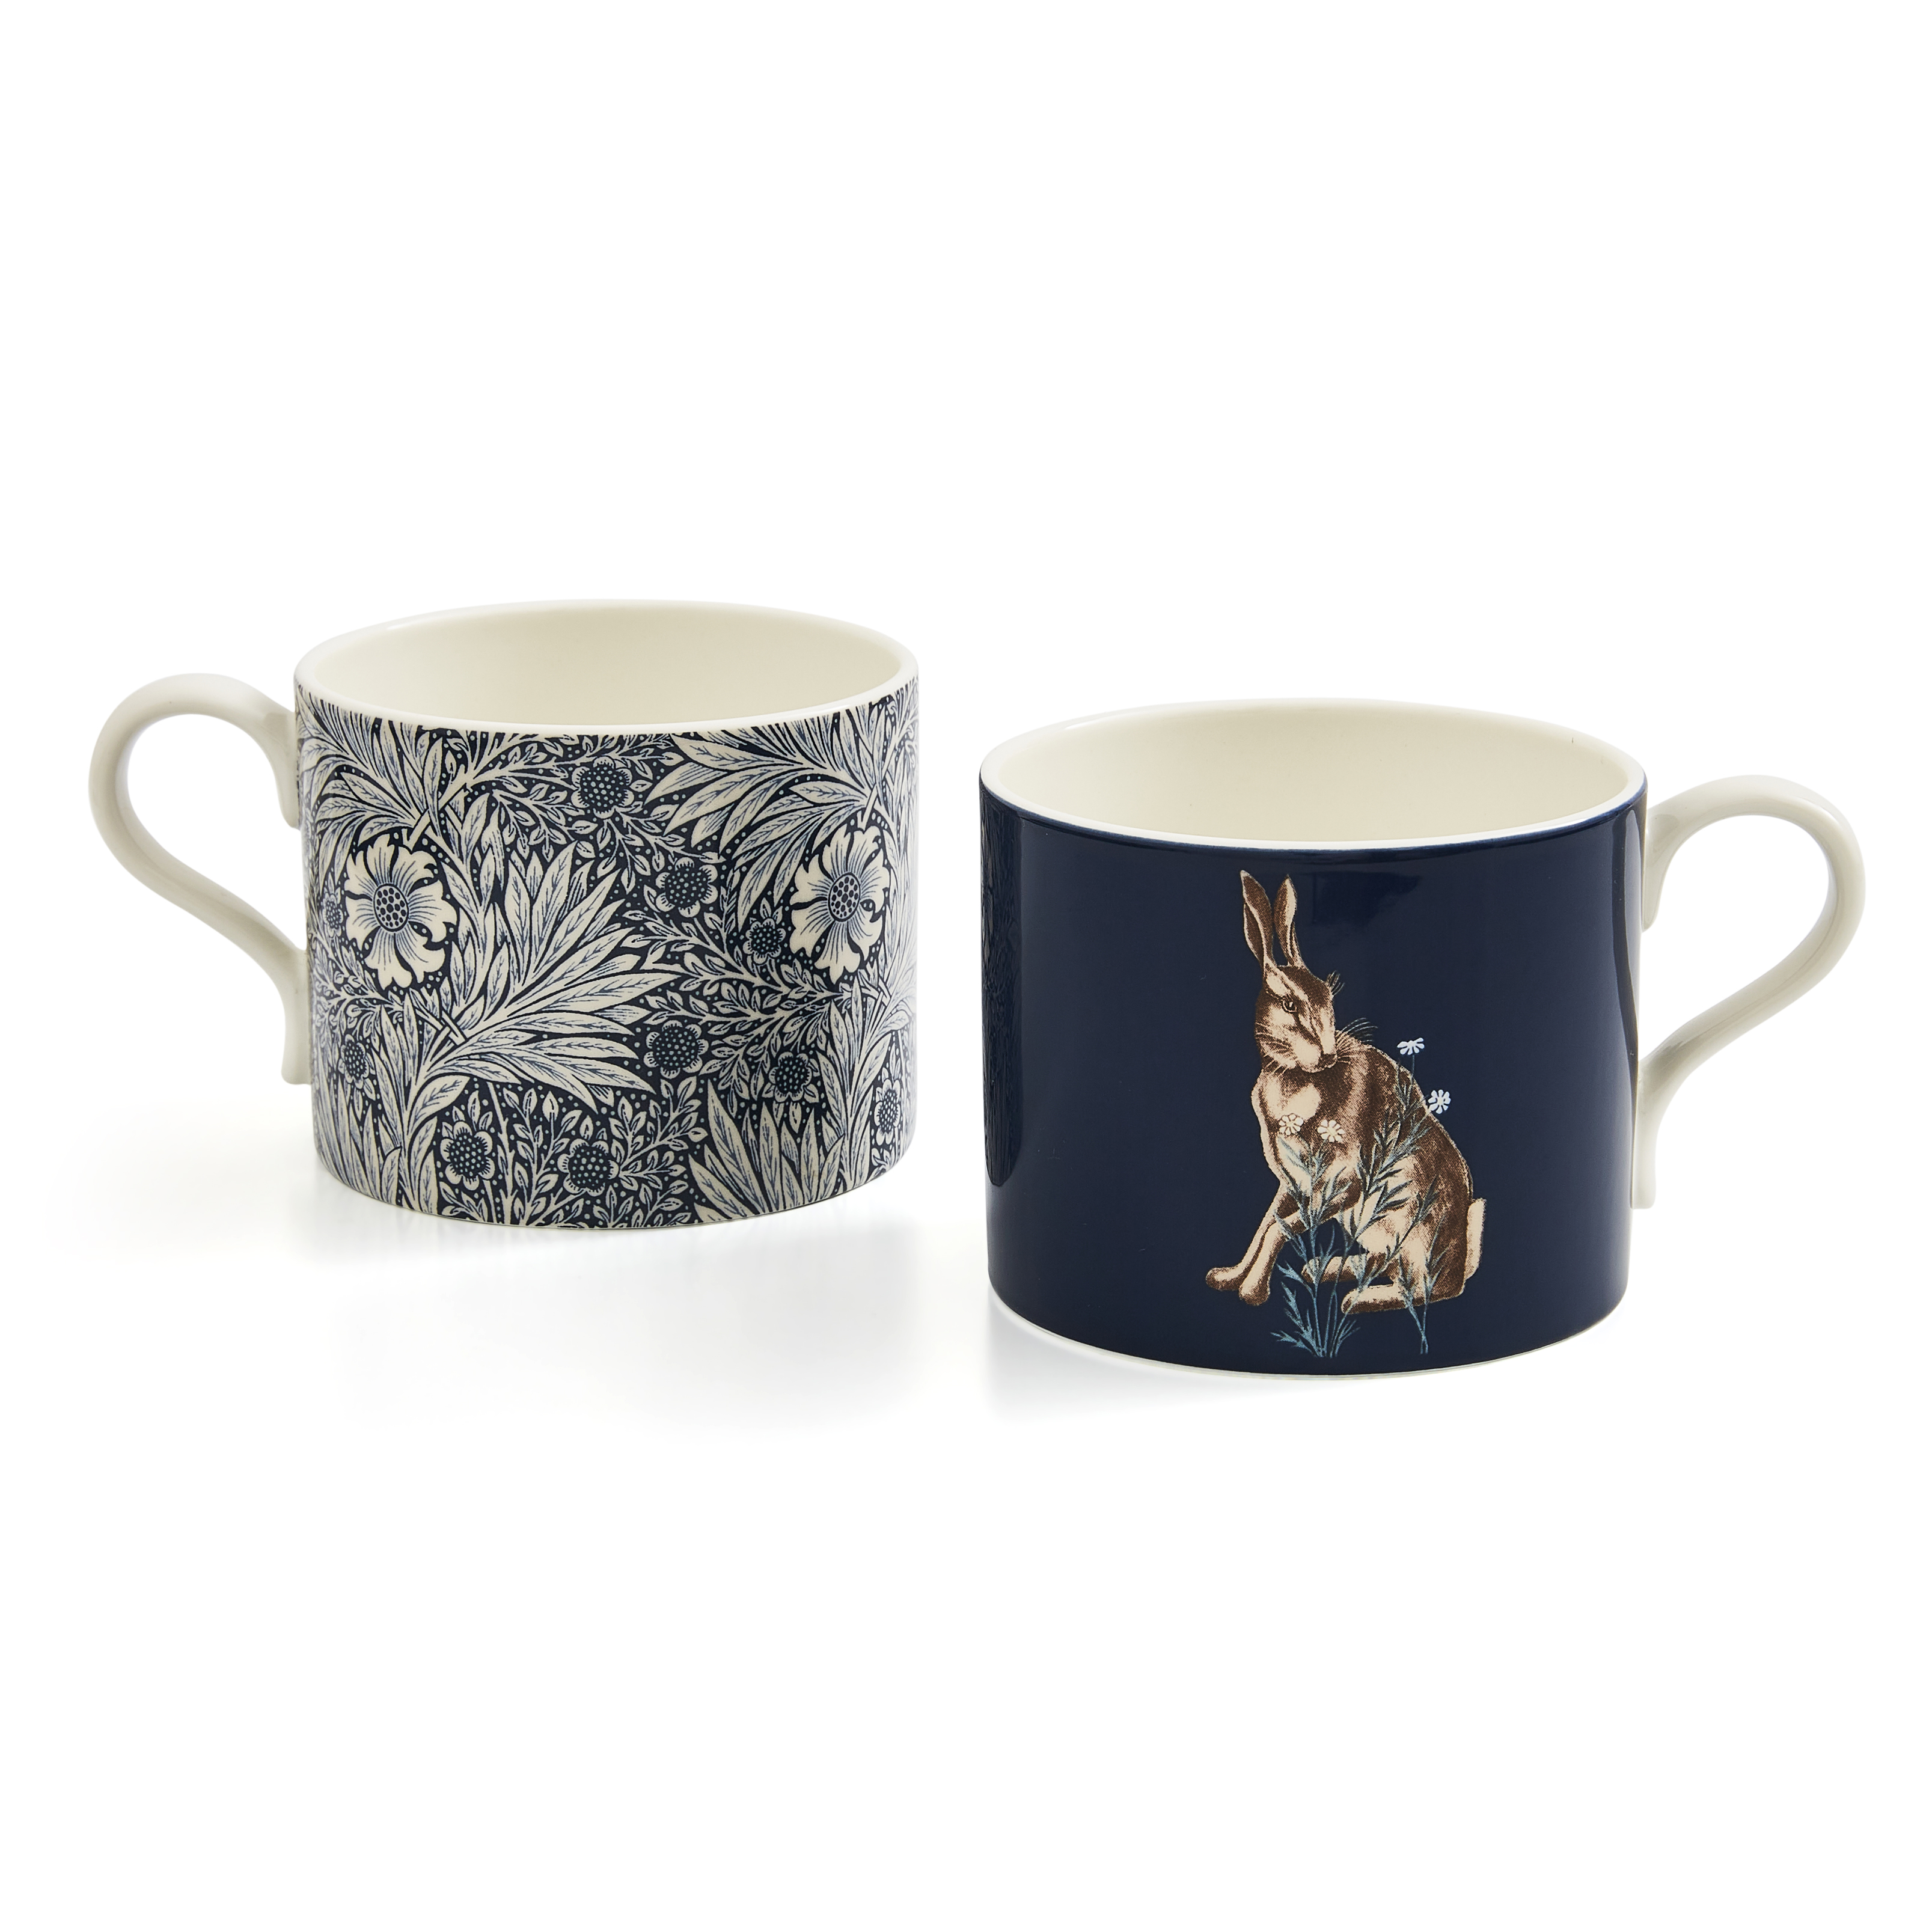 Morris & Co Set of 2 Mugs (Marigold & Hare) image number null